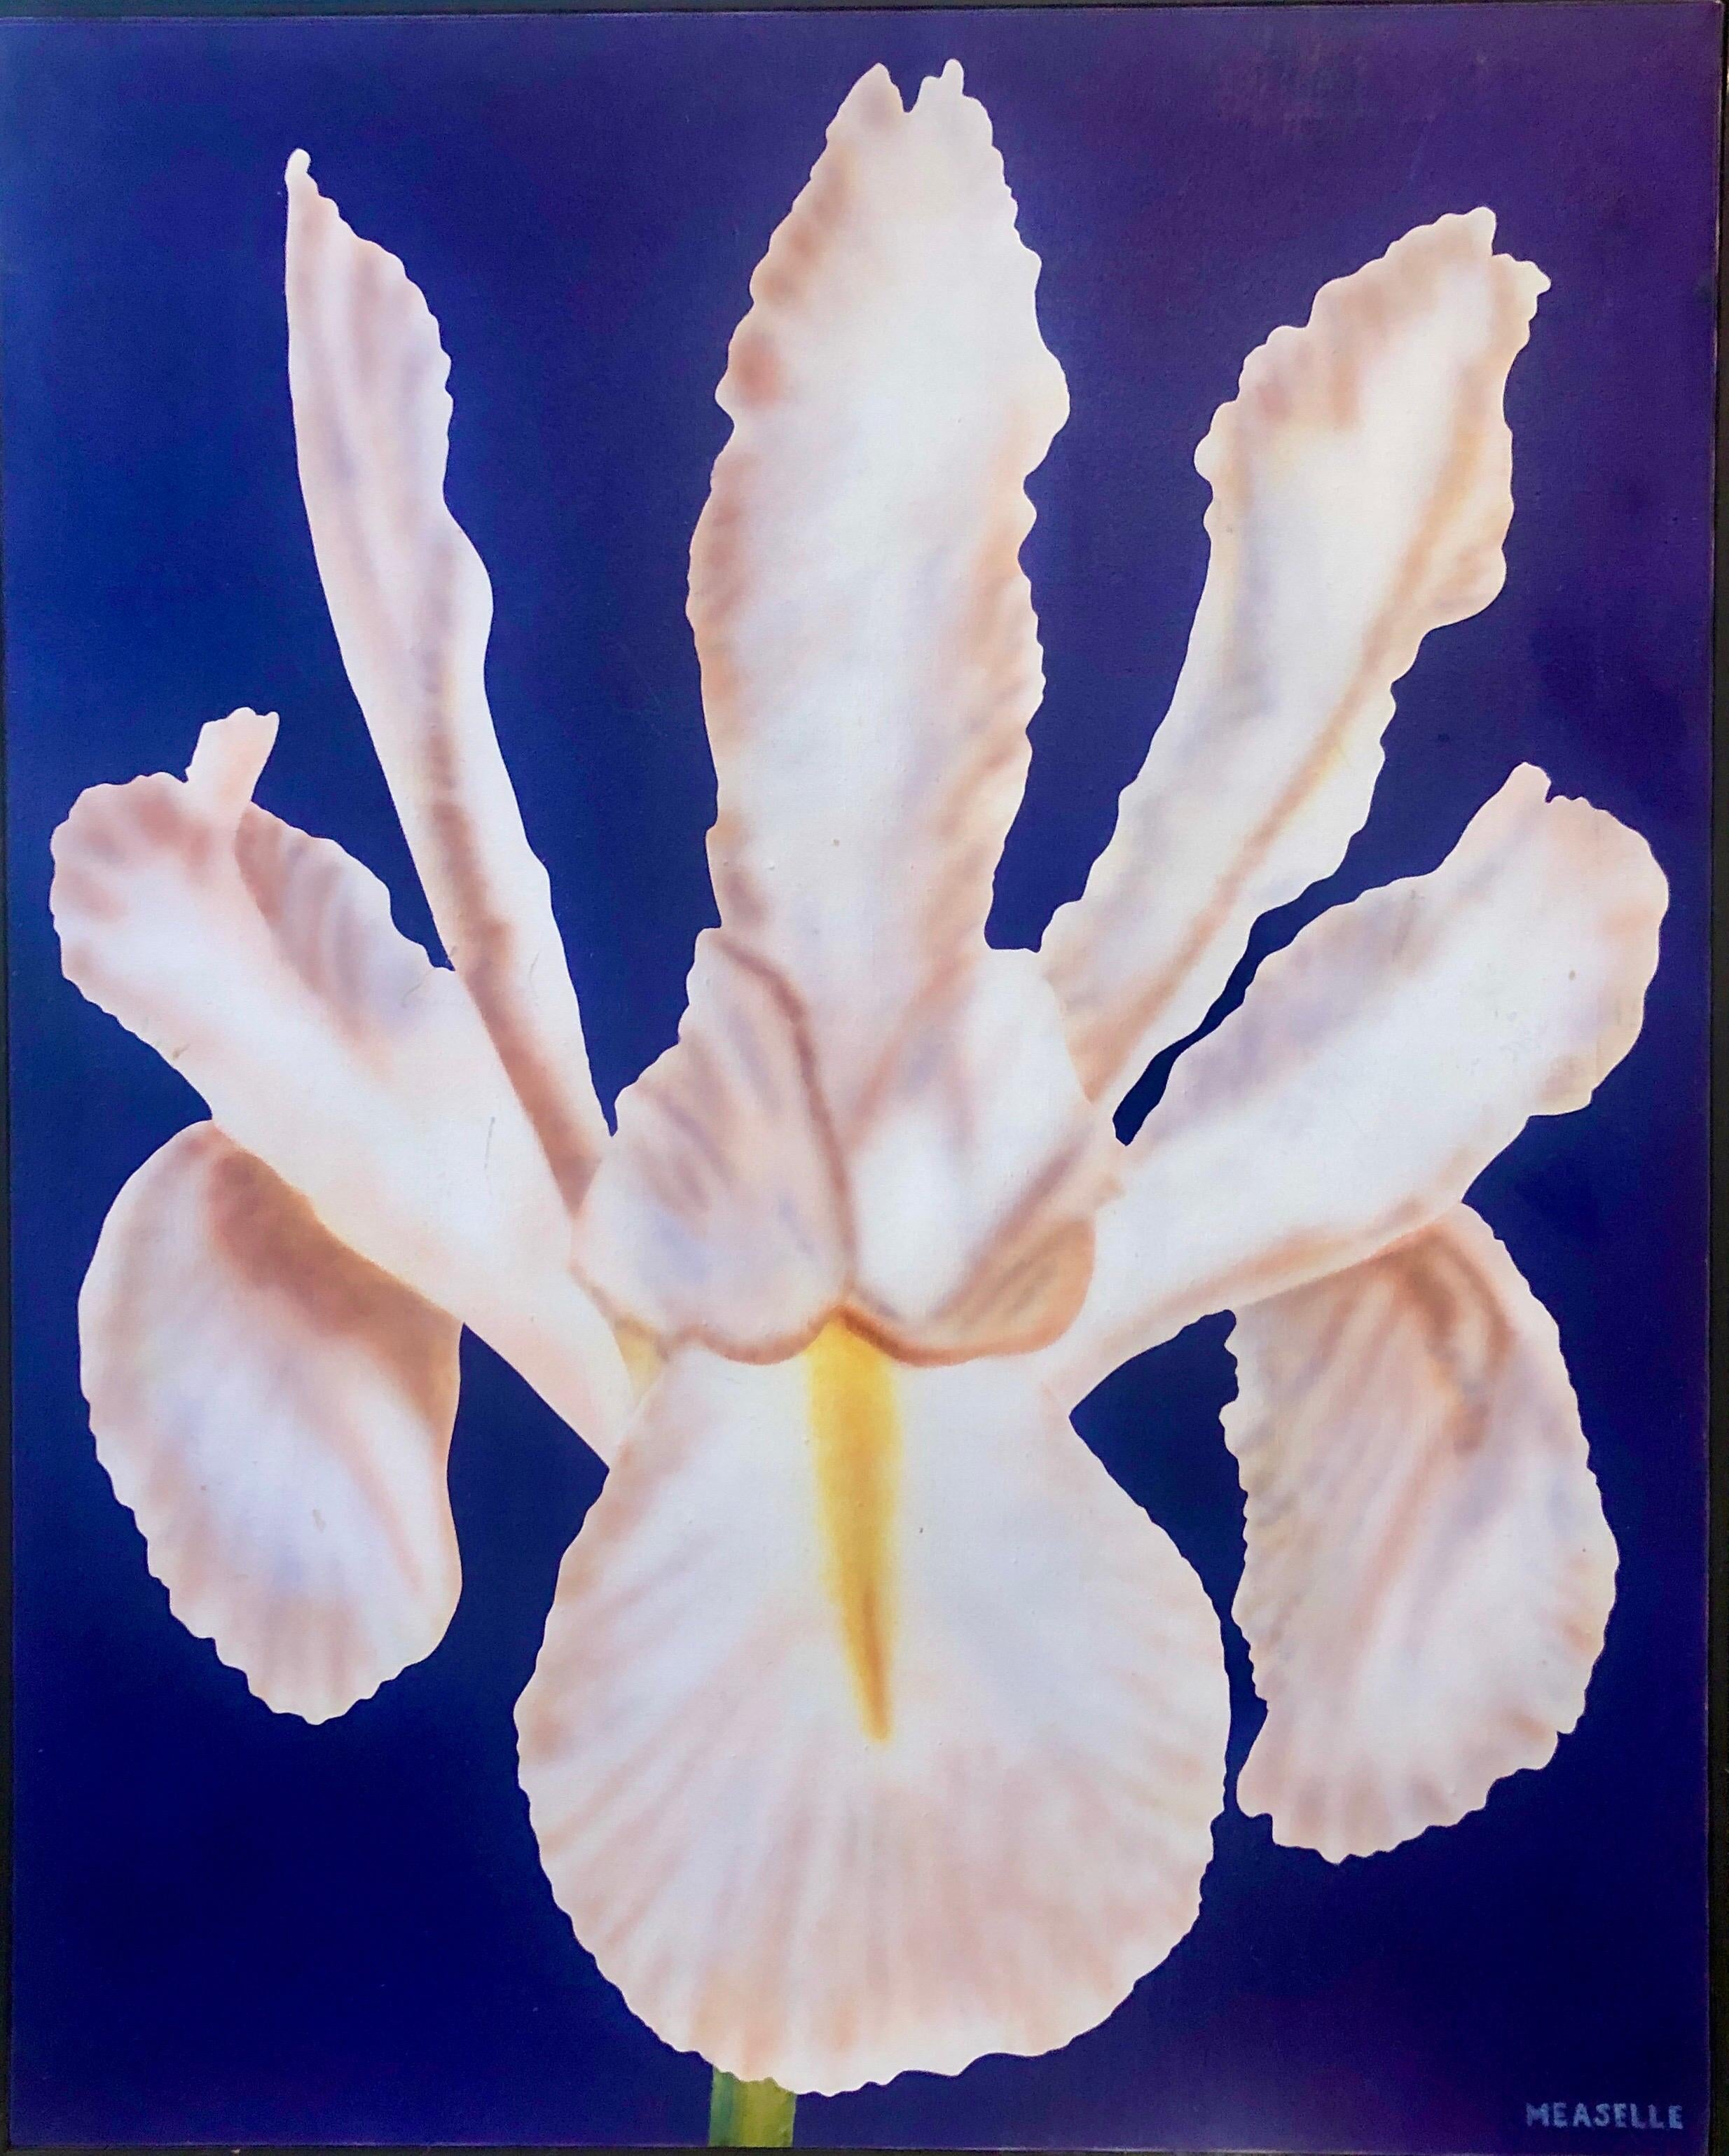 Clarence Measelle Figurative Painting - Photorealism Still Life Acrylic Painting Flower Photo Realist Orchid, Vivid Blue